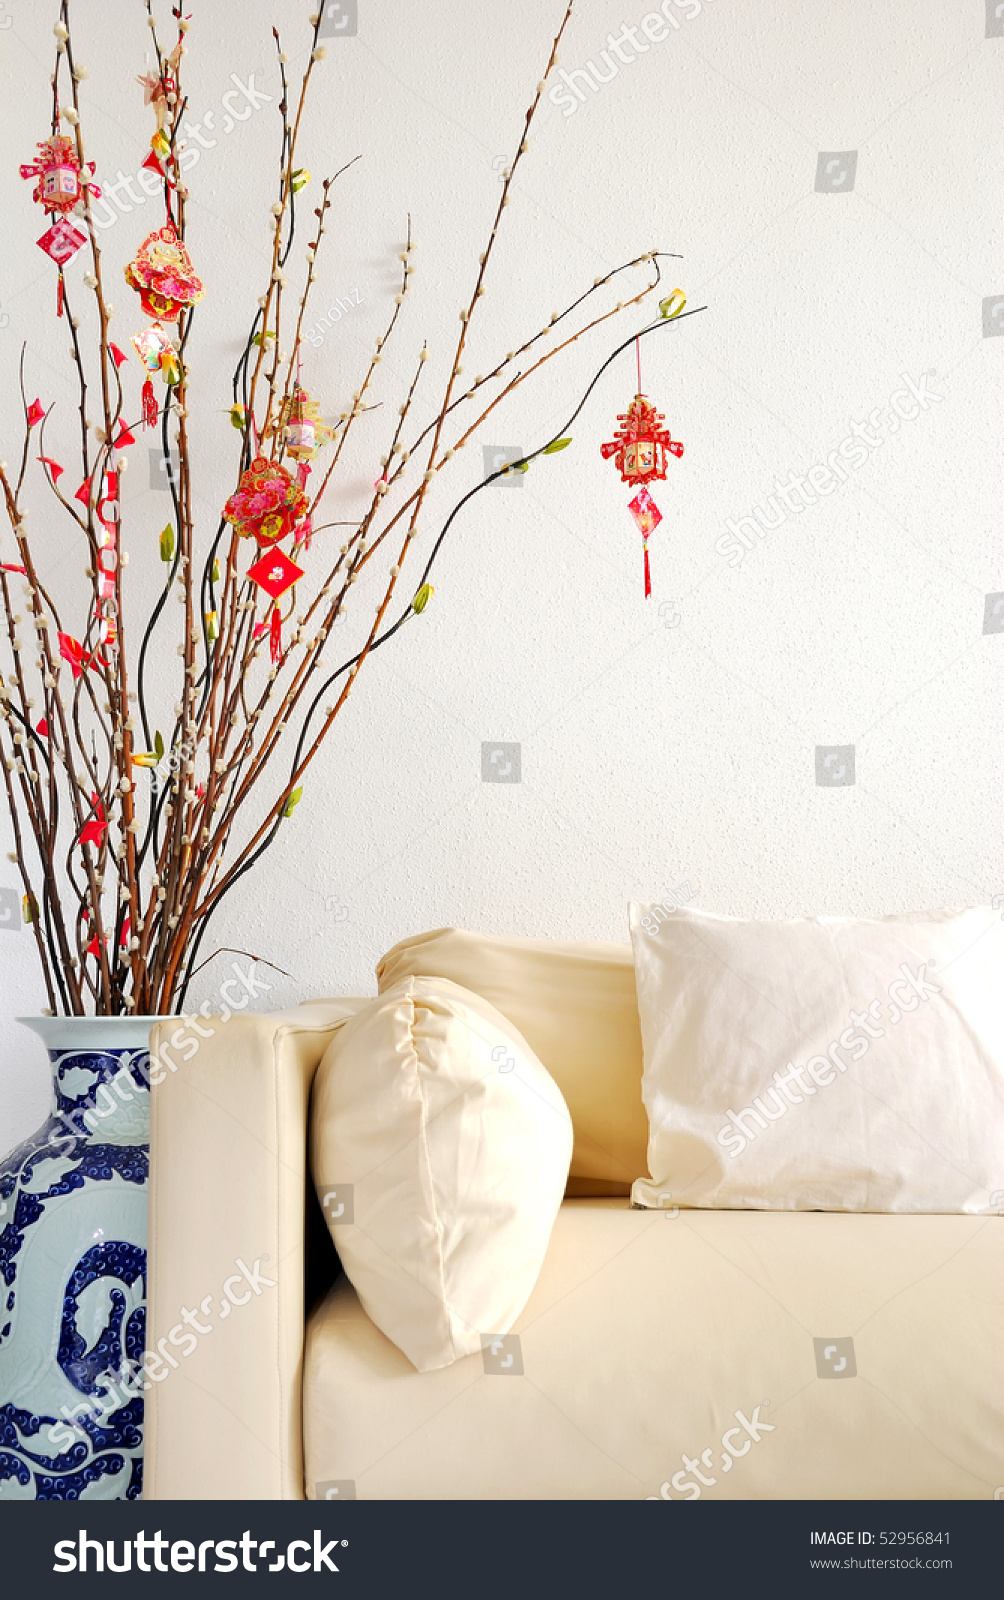 Chinese Lunar New Year Decoration Modern Stock Photo Edit Now